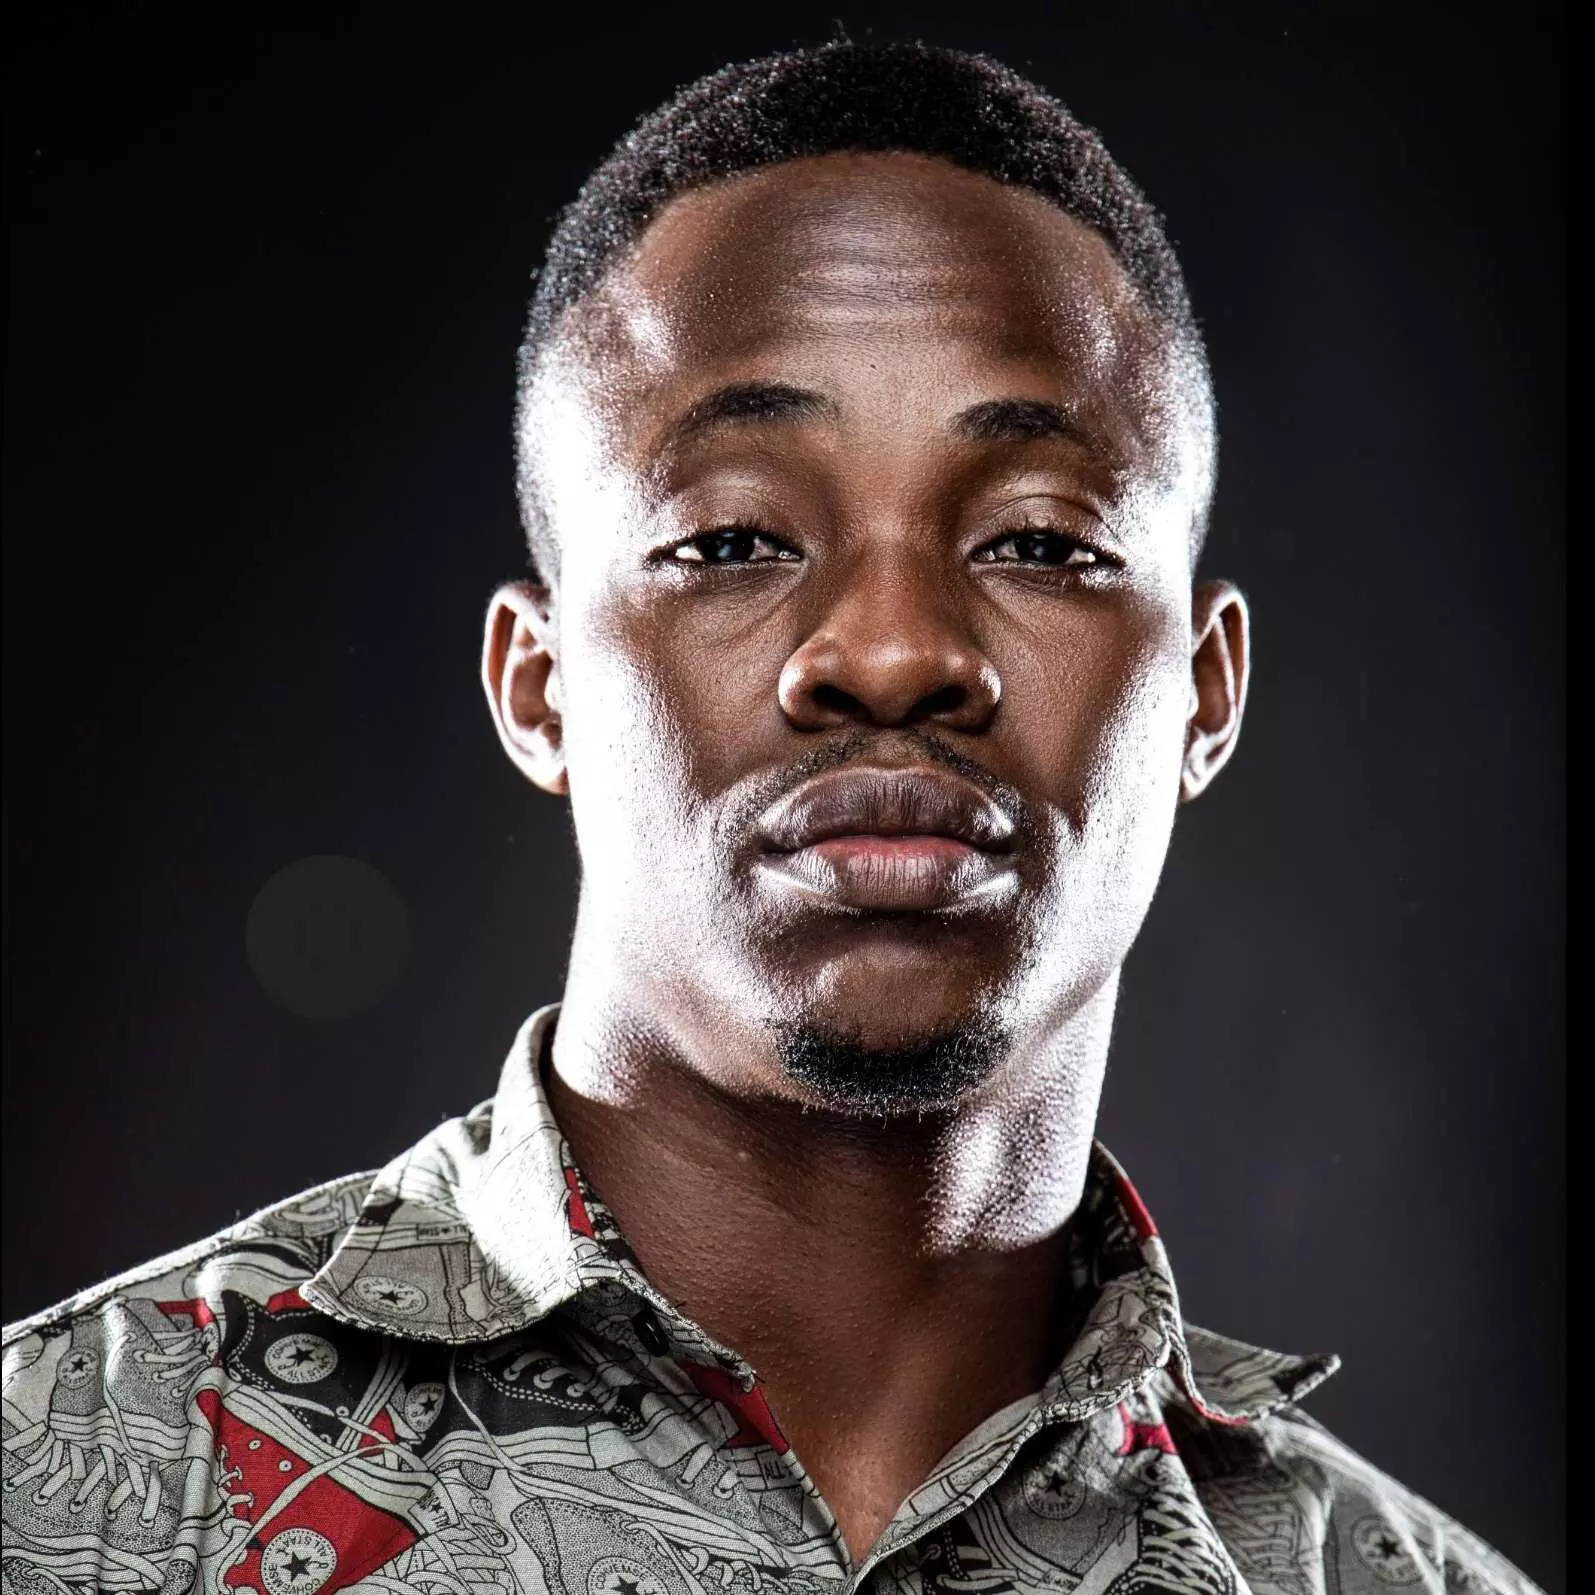 We support musicians, but dont receive due recognition – dancer